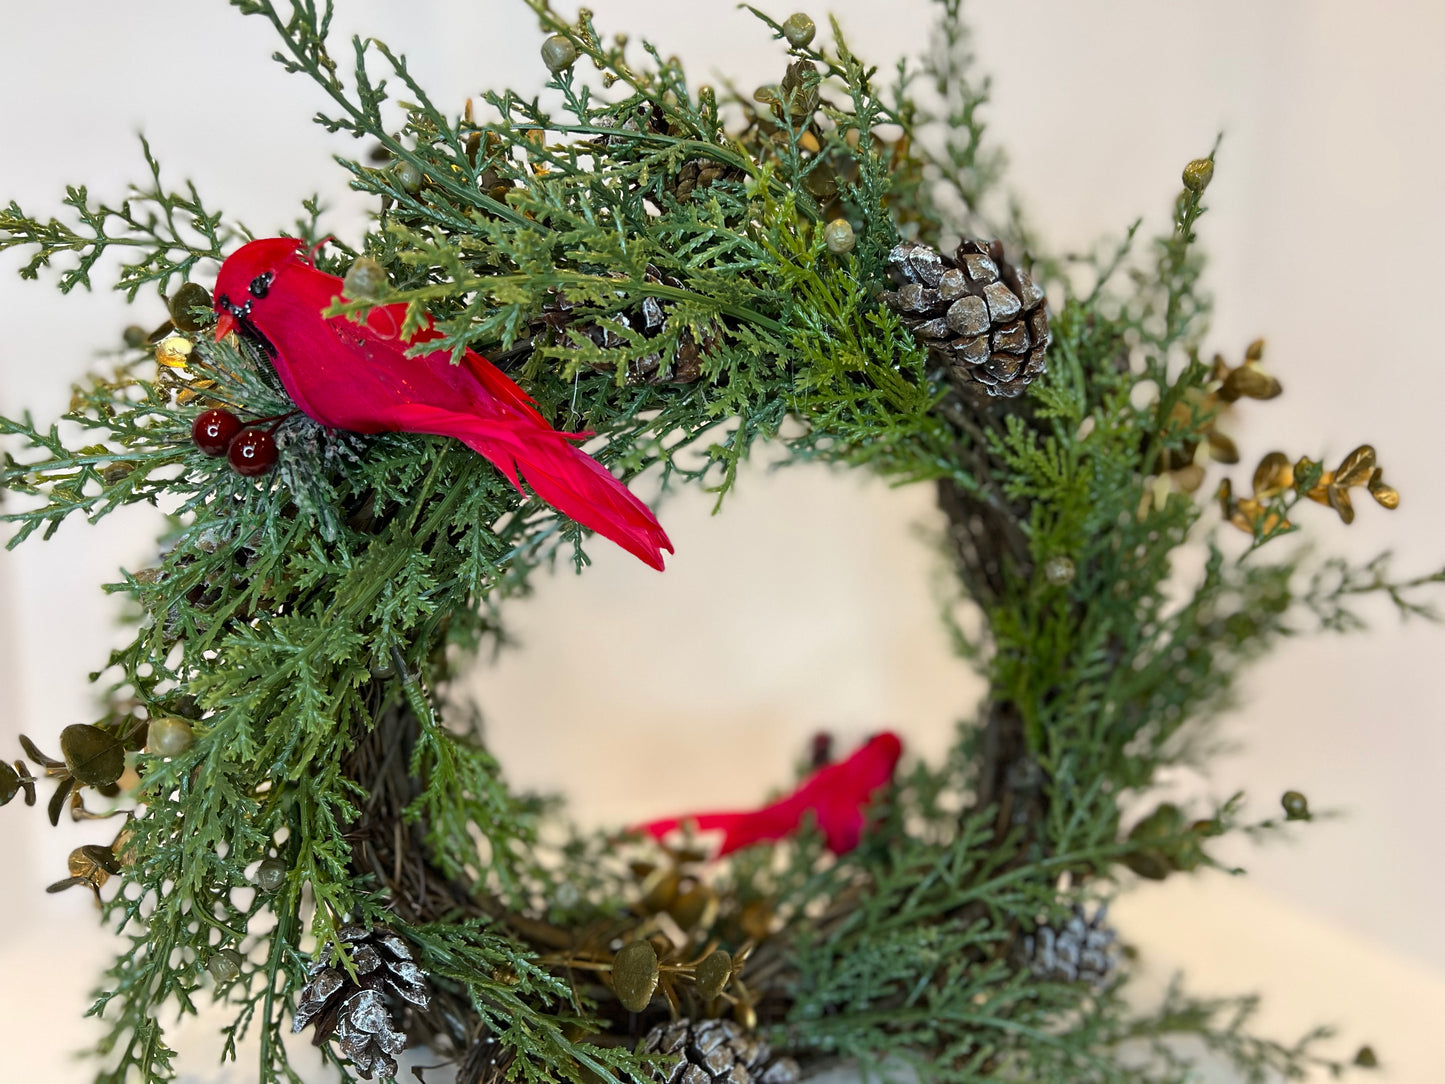 12" Free-Standing, 2-Sided Wreath with Cardinals